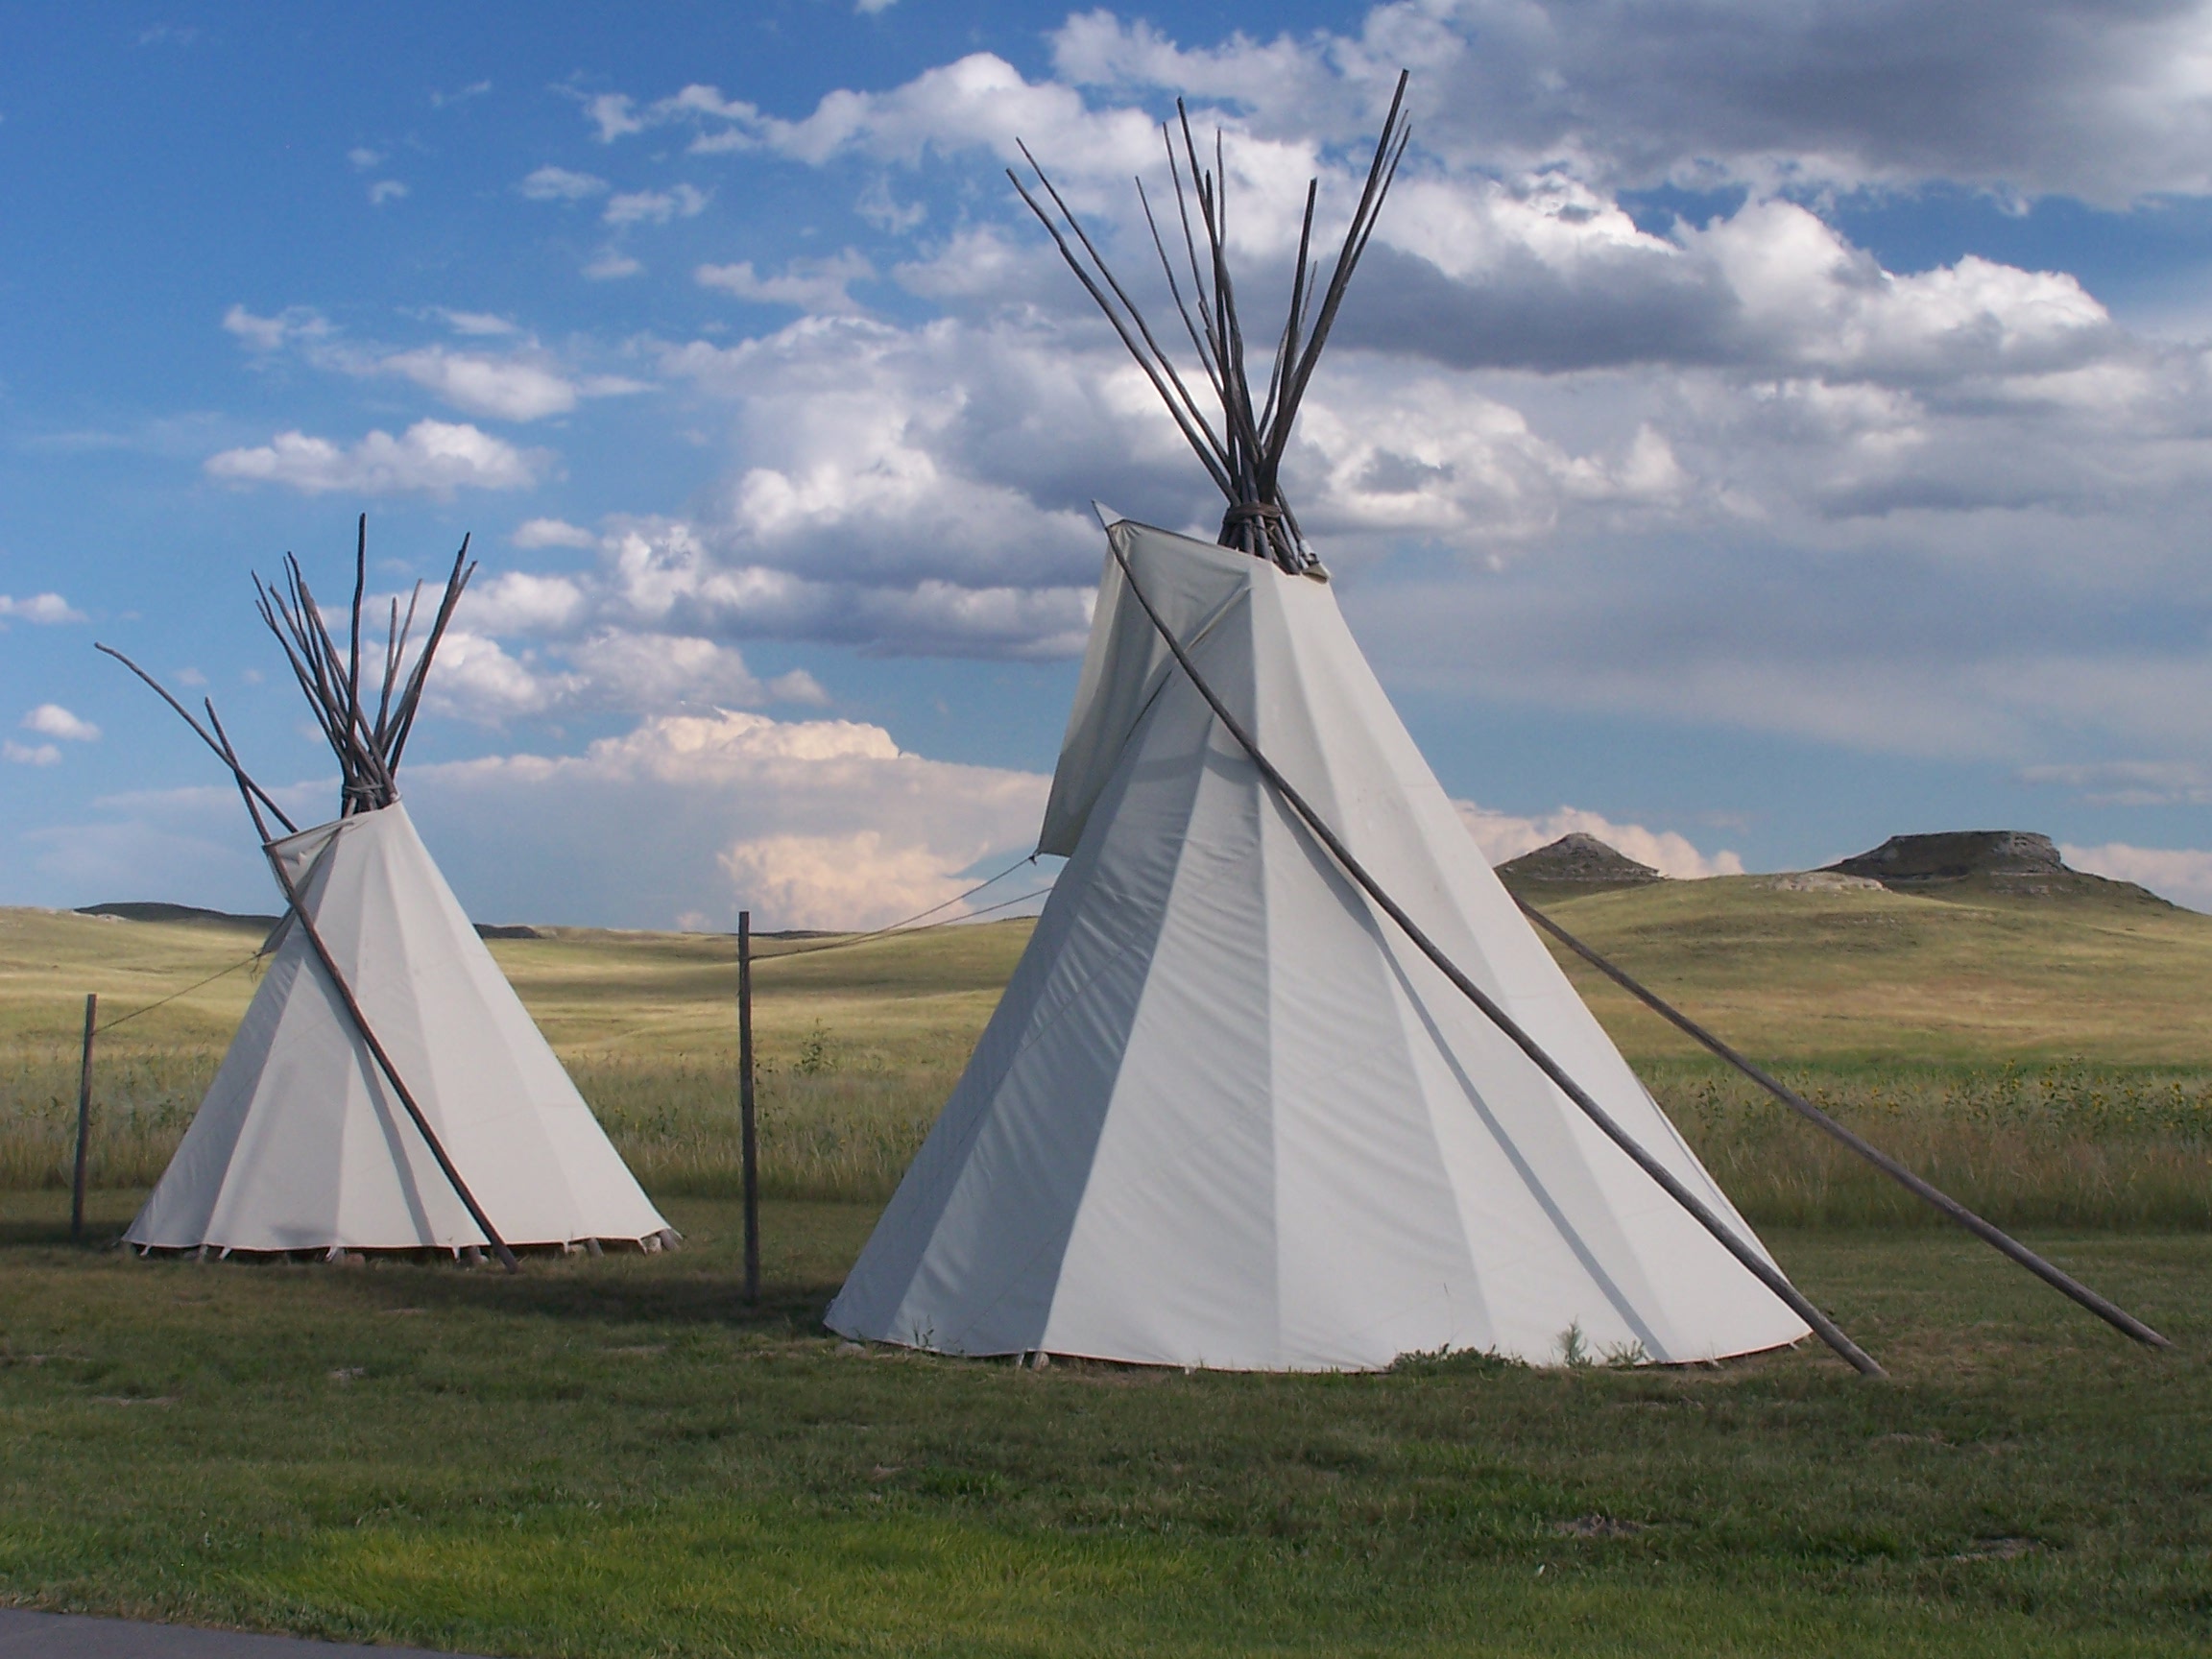 Tipis and Fossil Hills represent the two subjects that Agate Fossil Beds interprets.